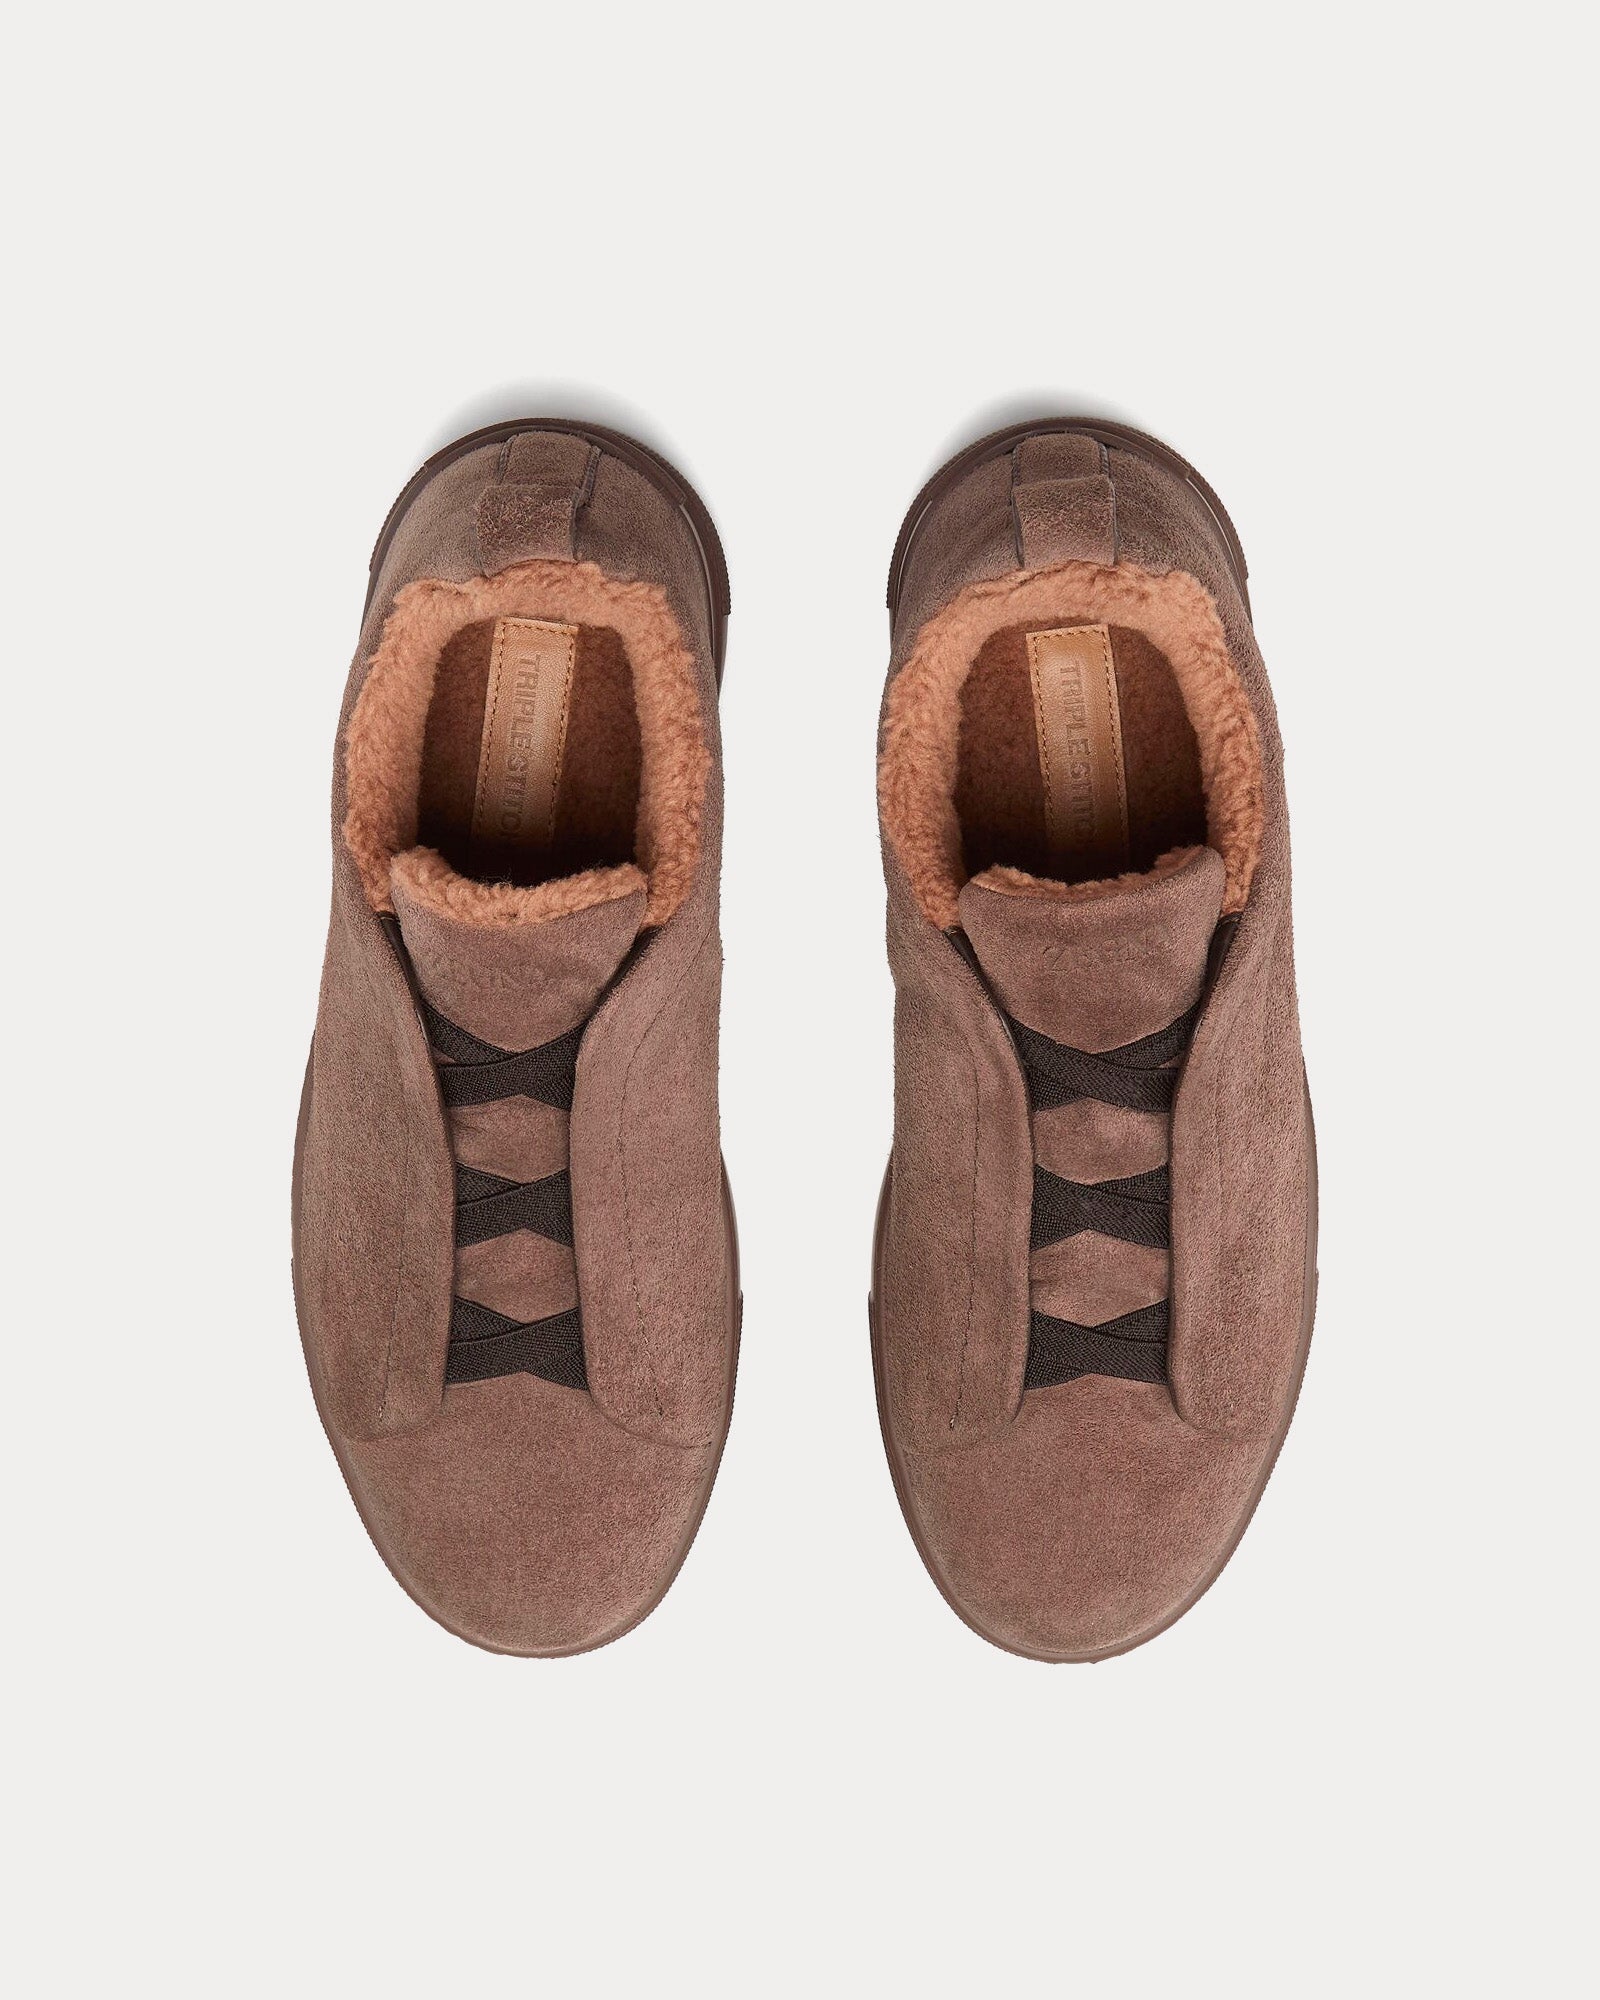 Zegna - Triple Stitch Suede & Shearling Greyish Brown Slip On Sneakers